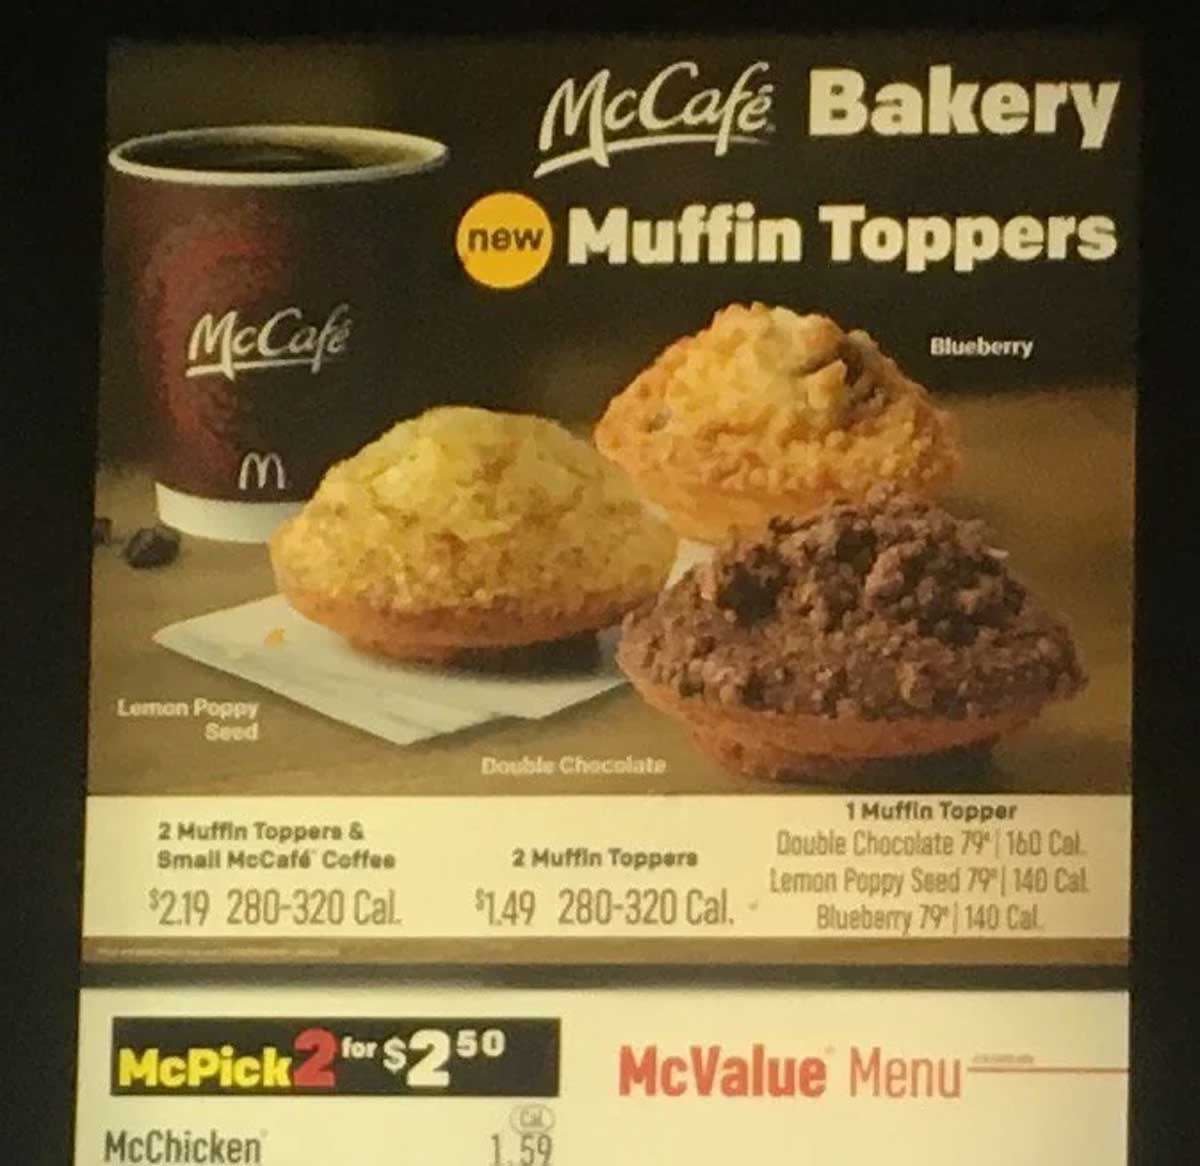 Advertisement for McDonald's McCafe Muffin Toppers